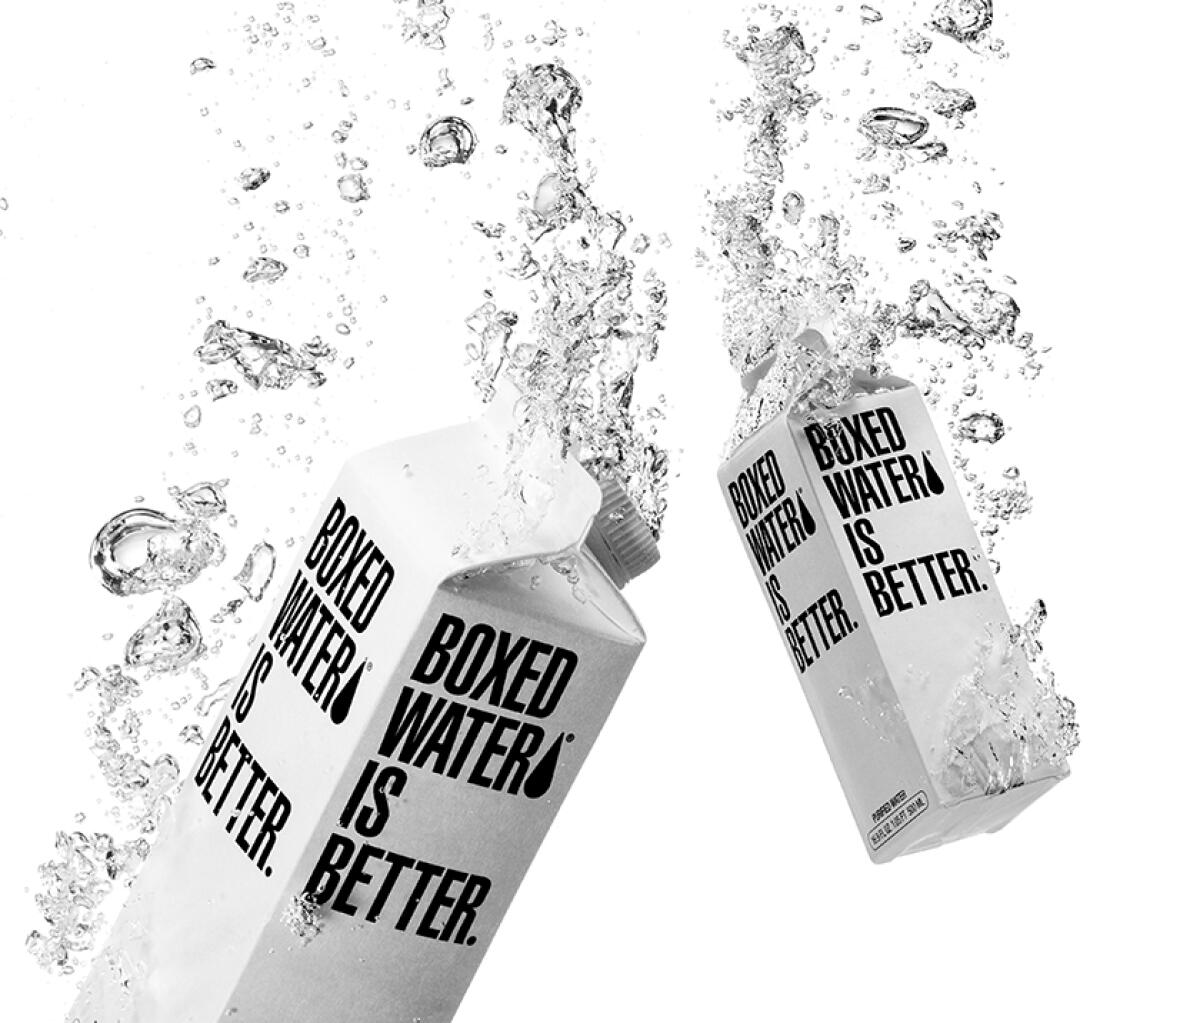 boxed water images